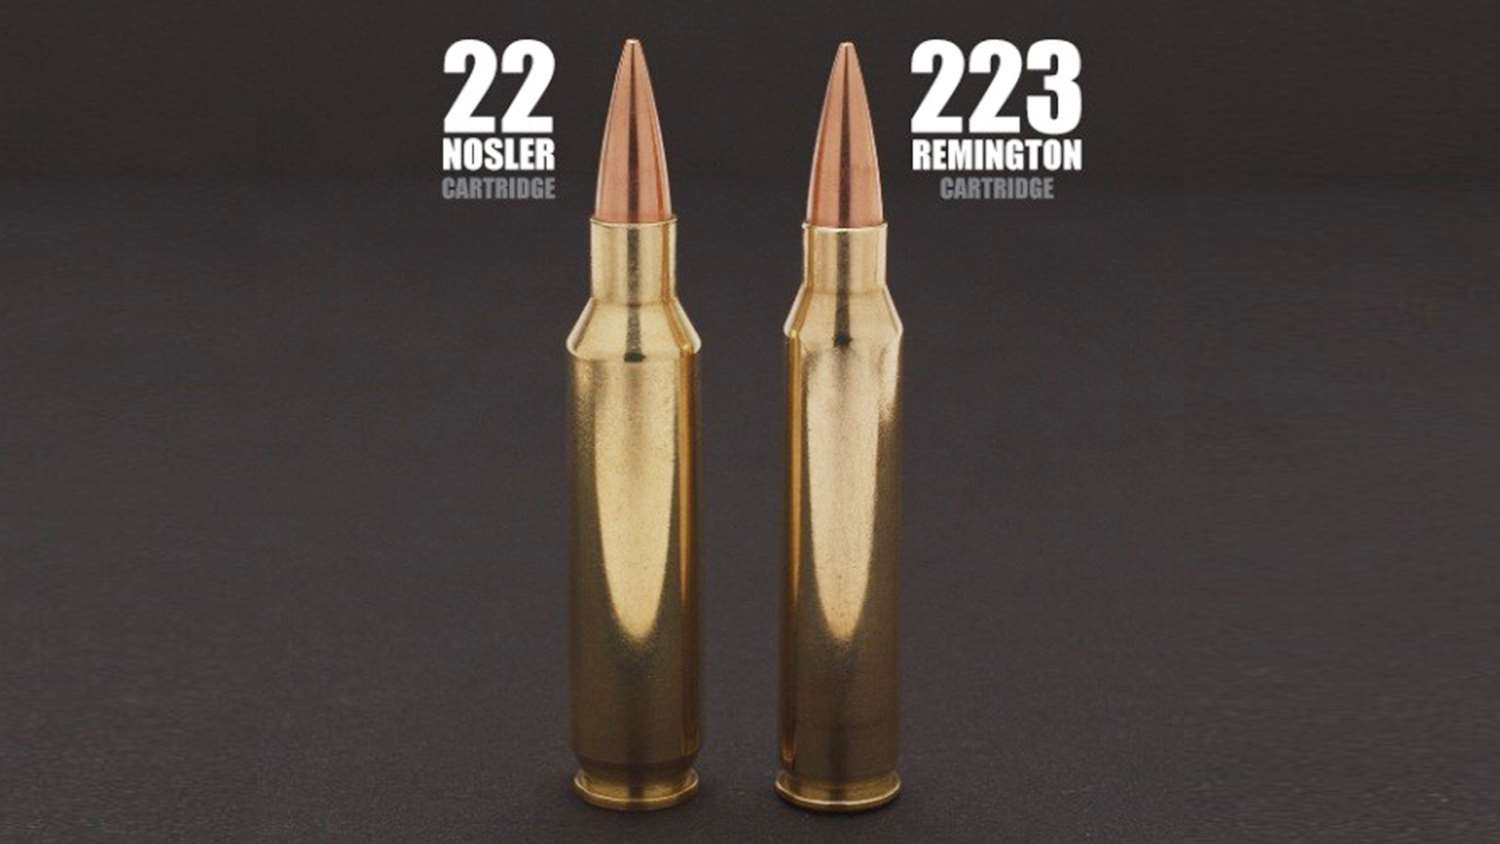 Is 22 Nosler Ready For Competition?